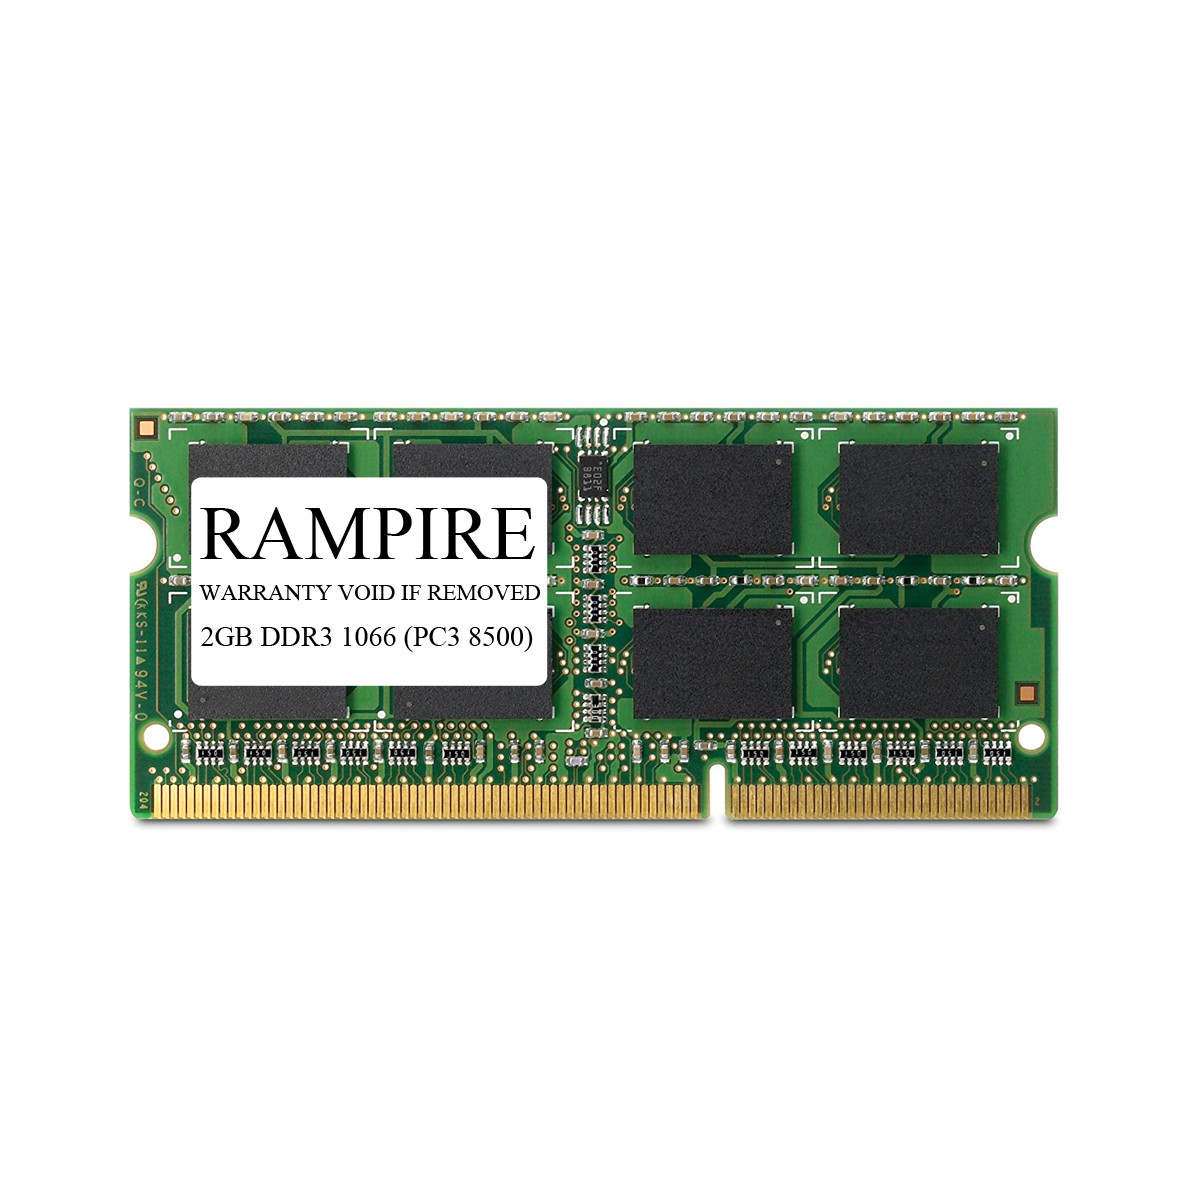 RAMPIRE 2GB DDR3 1066 (PC3 8500) 204-Pin DDR3 SO-DIMM 1.5V 2Rx8 Non-ECC Unregistered Memory for Laptop/Notebook PC and Mac